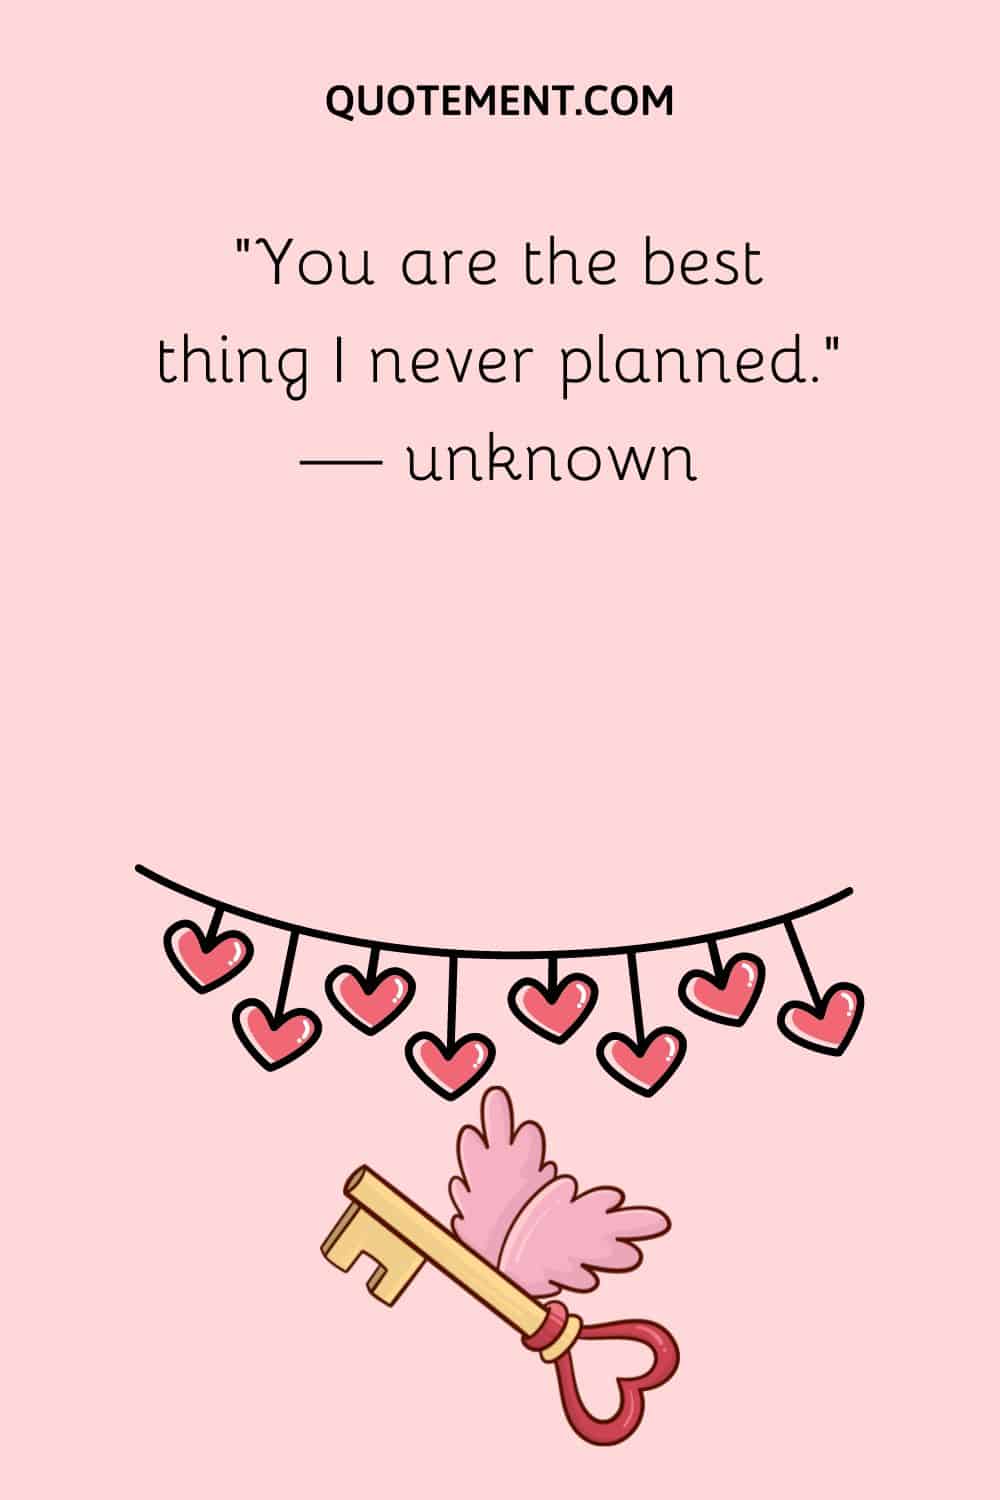 “You are the best thing I never planned.” — unknown